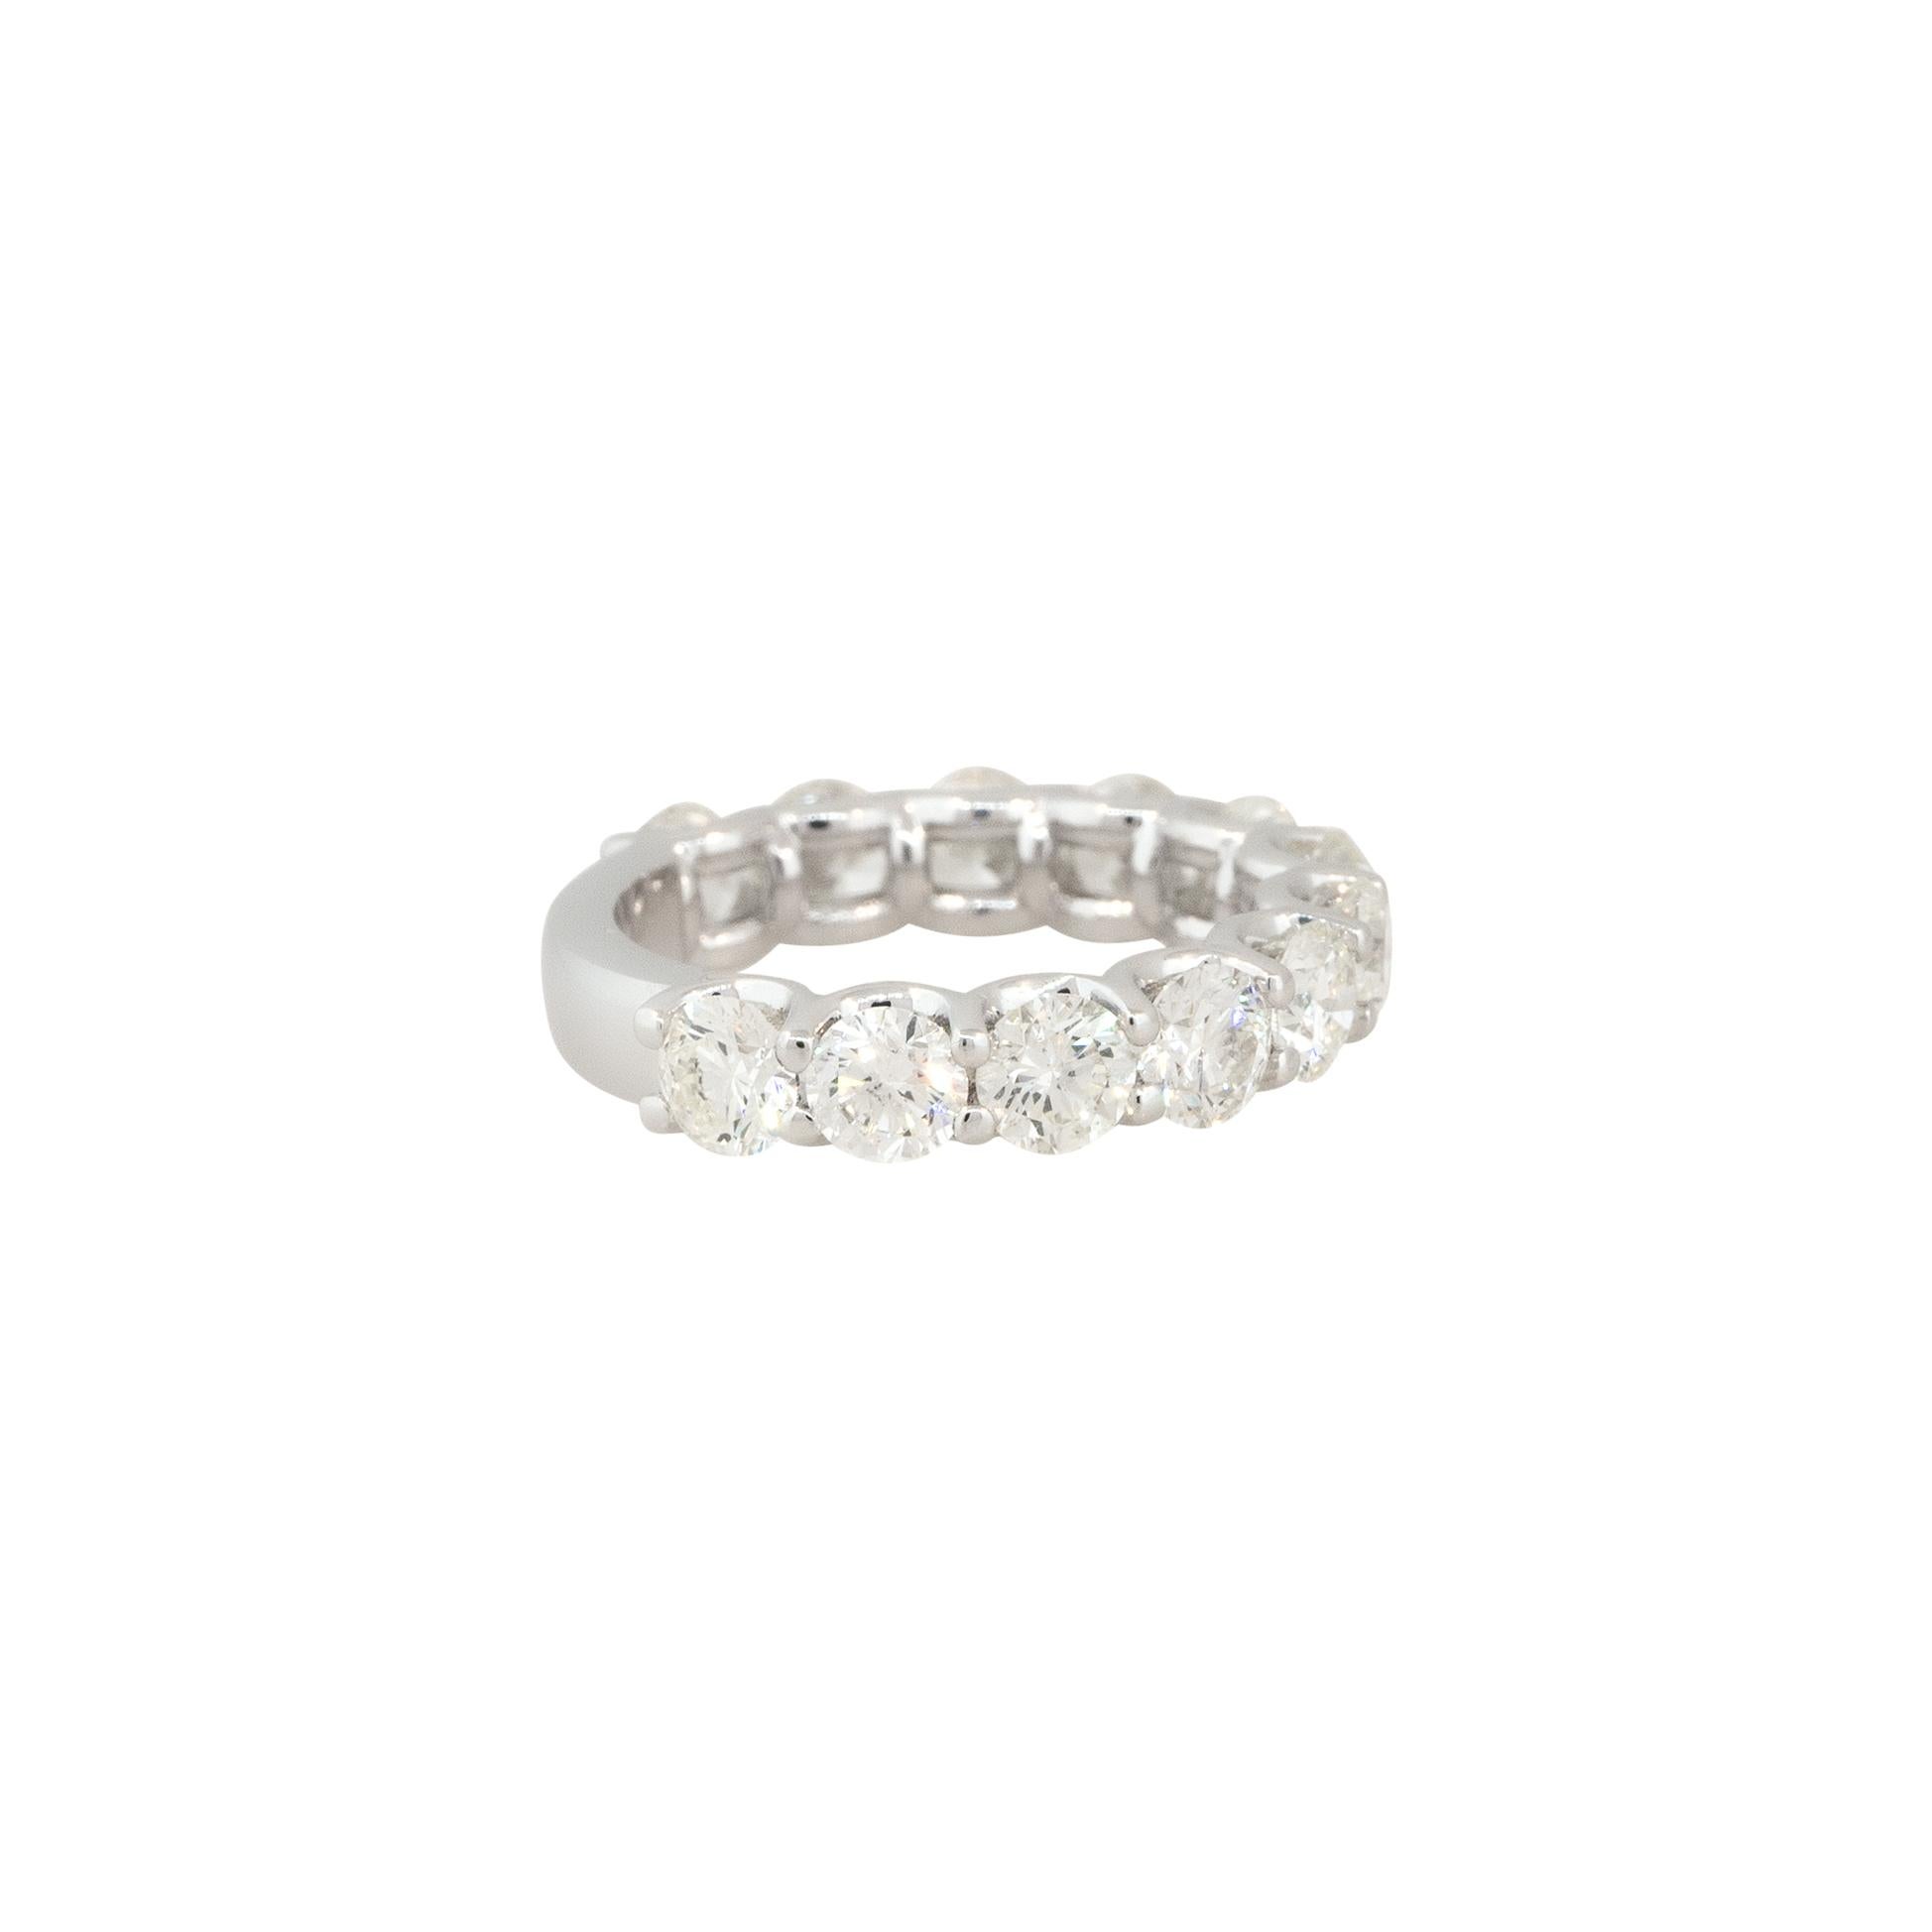 14k White Gold 3.78ctw Round Brilliant 12 Diamond 3/4 Wedding Band

Style: Women's Round Brilliant Diamond Band
Material: 14k White Gold
Diamond Details: Approximately 3.78ctw of Round Brilliant Cut Diamonds. Diamonds are prong set and they do not